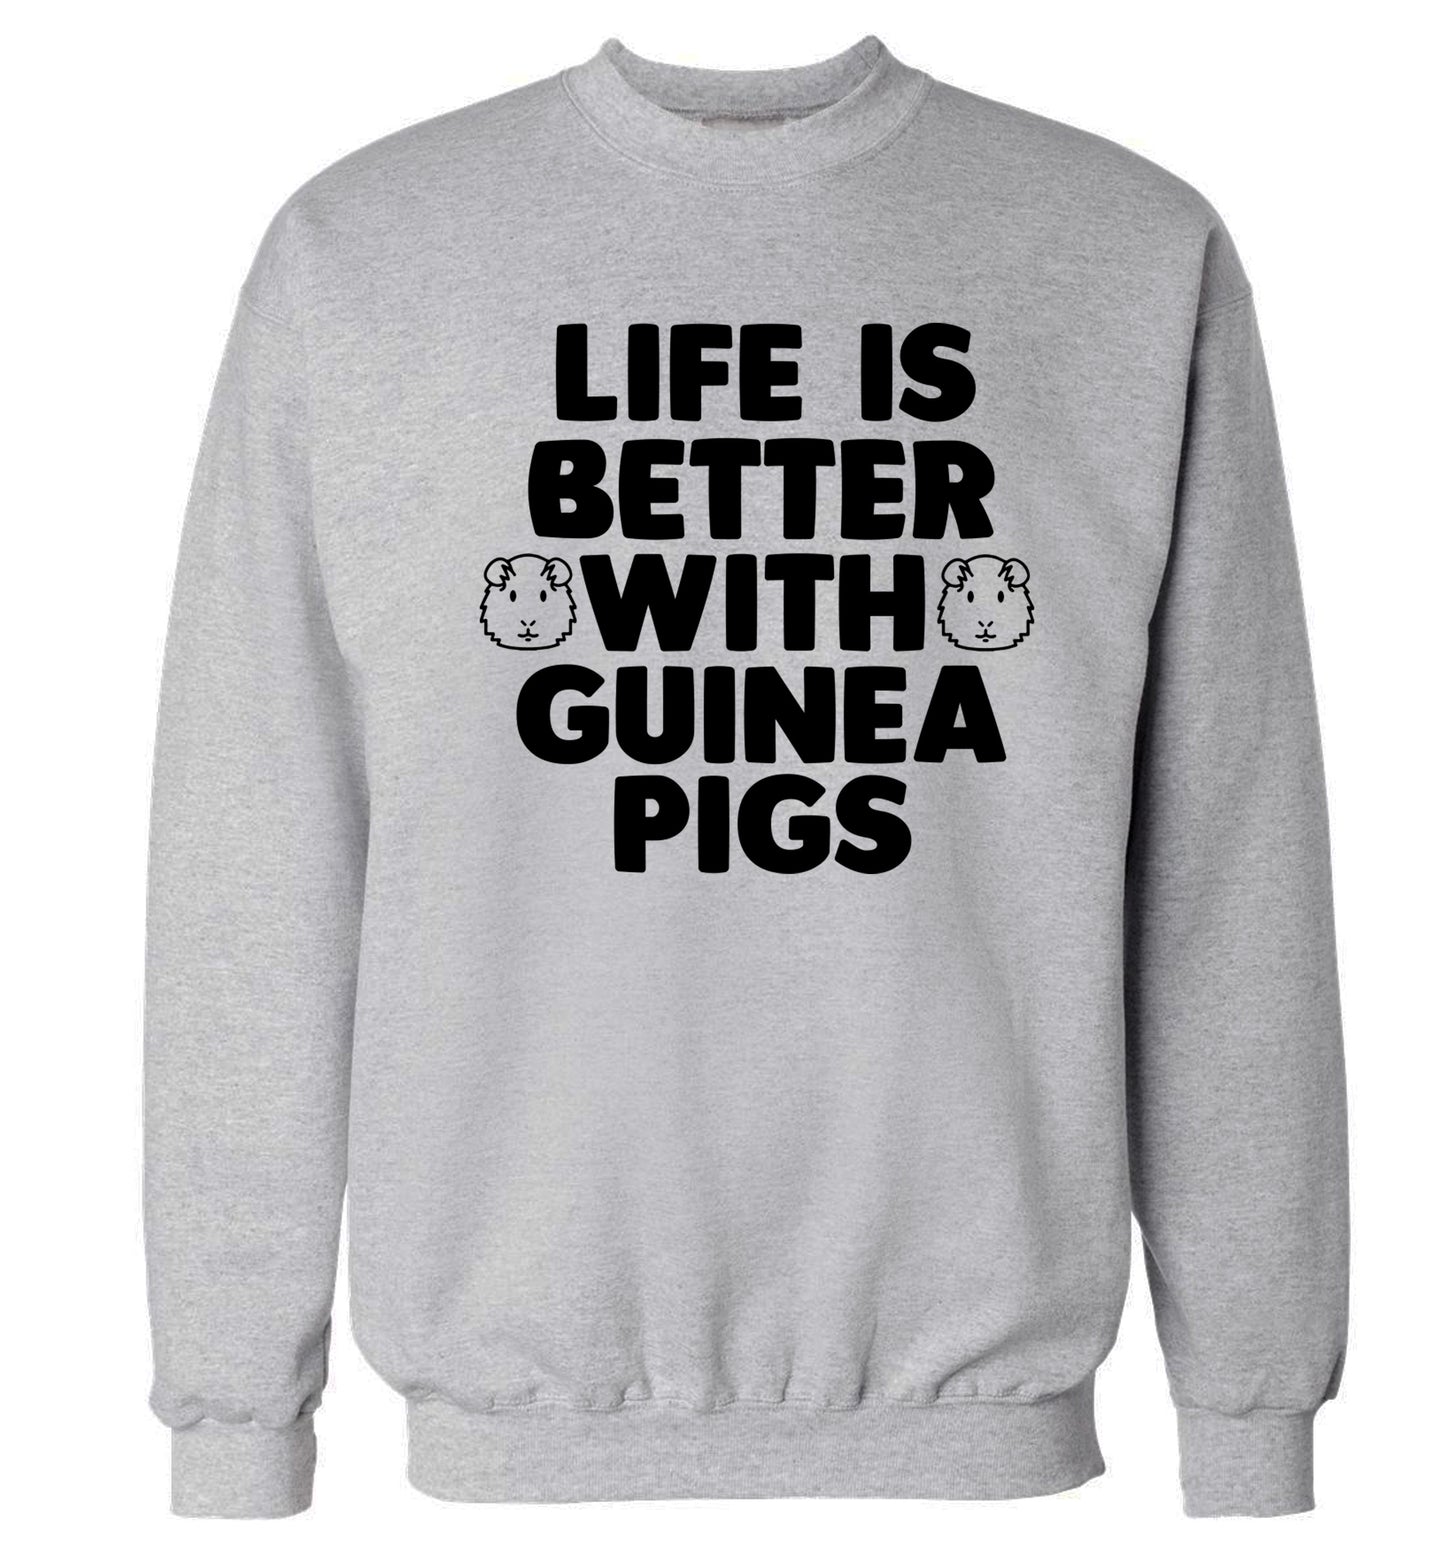 Life is better with guinea pigs Adult's unisex grey  sweater 2XL